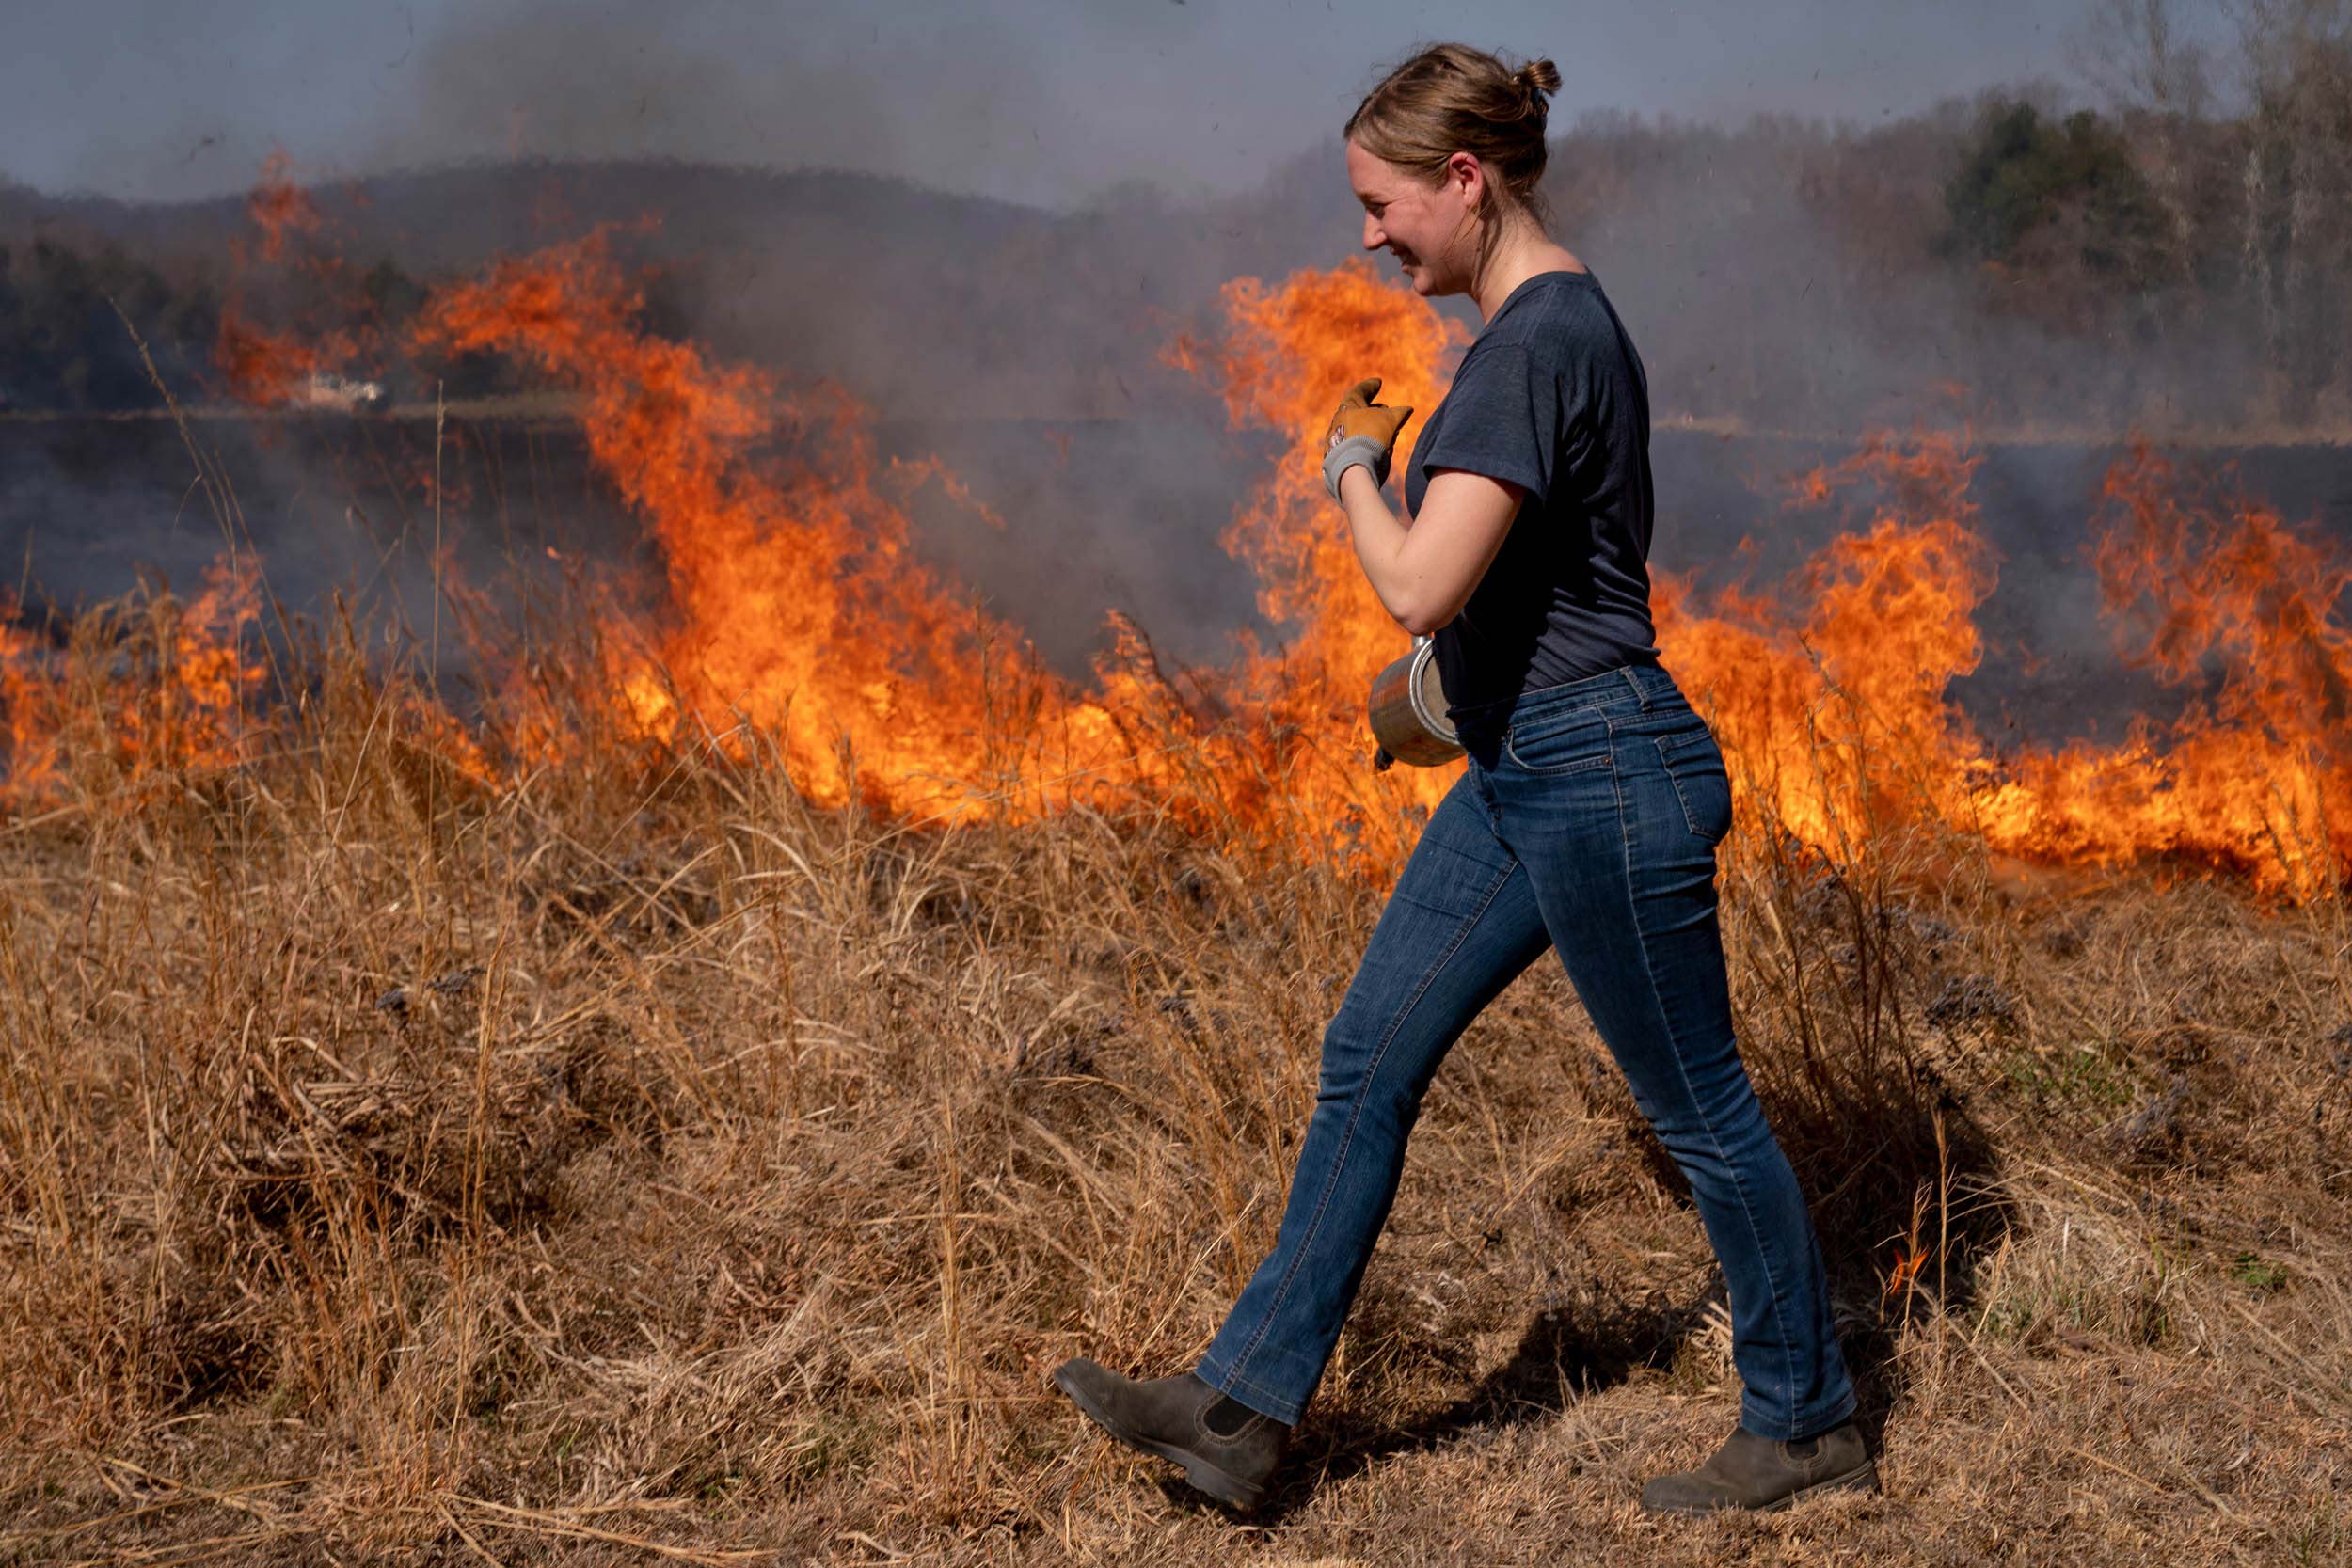 A woman walks next to a line burning thatch in front of a lake